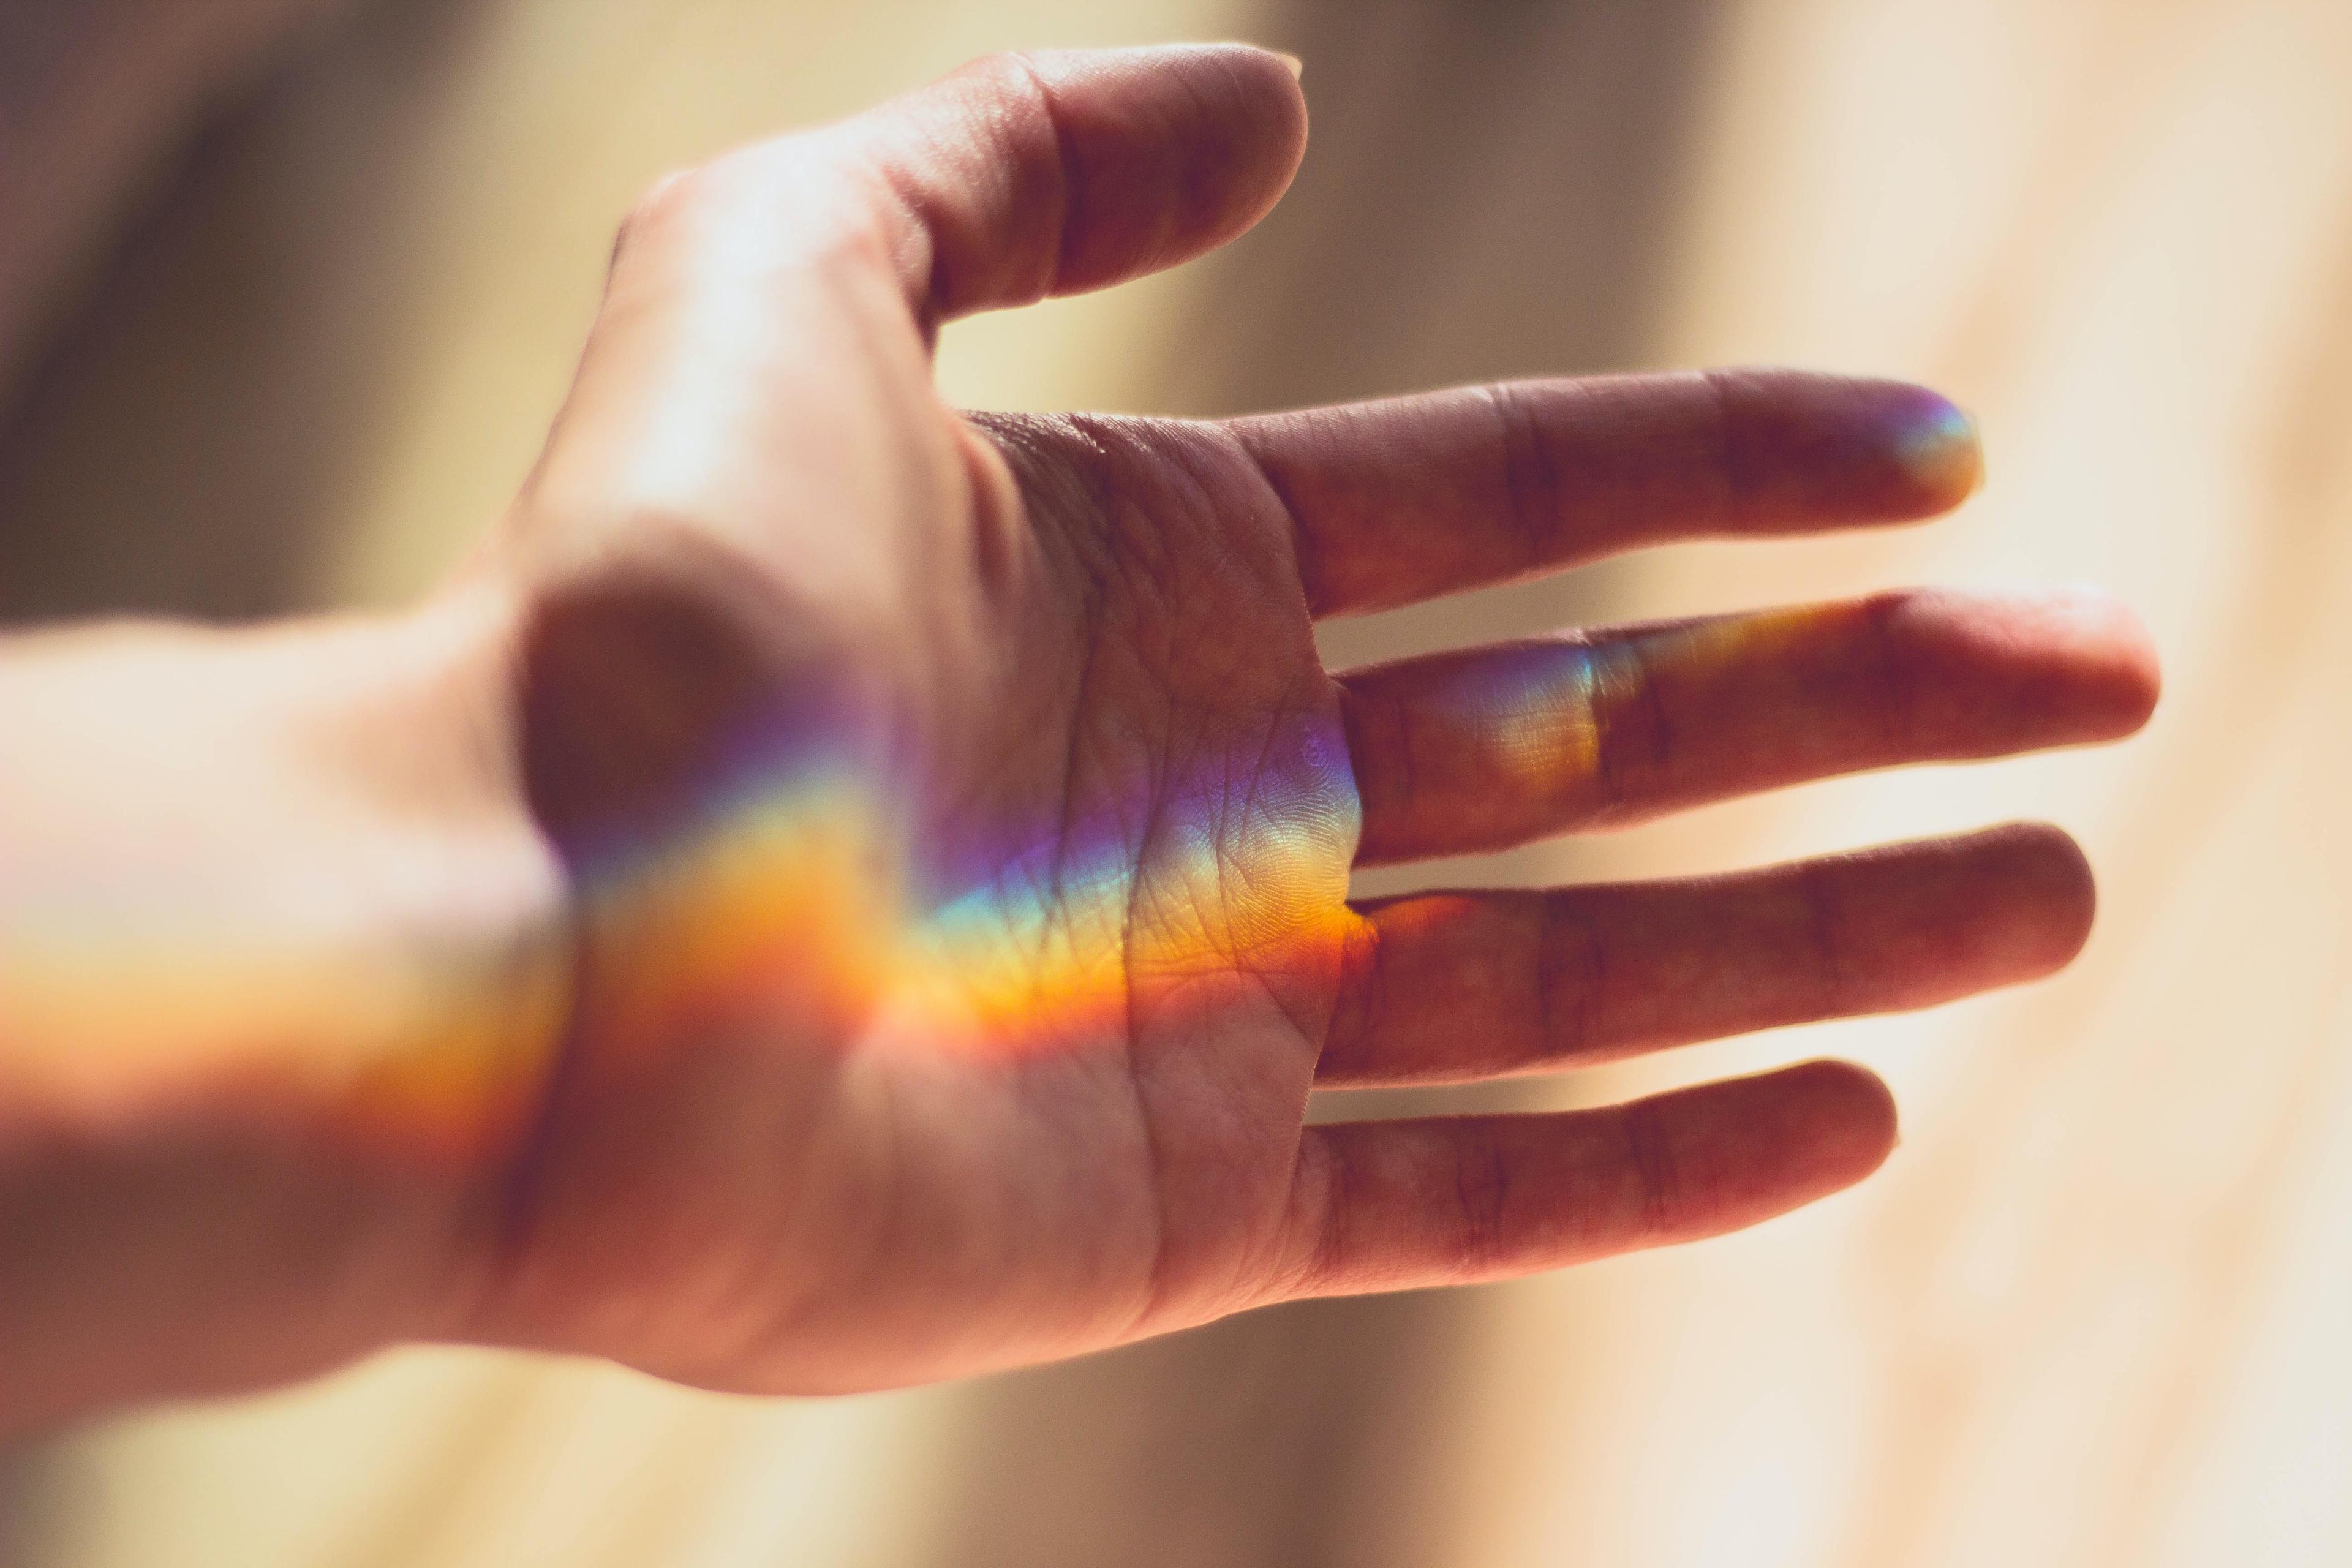 A hand in the sun with a reflected rainbow light across the palm